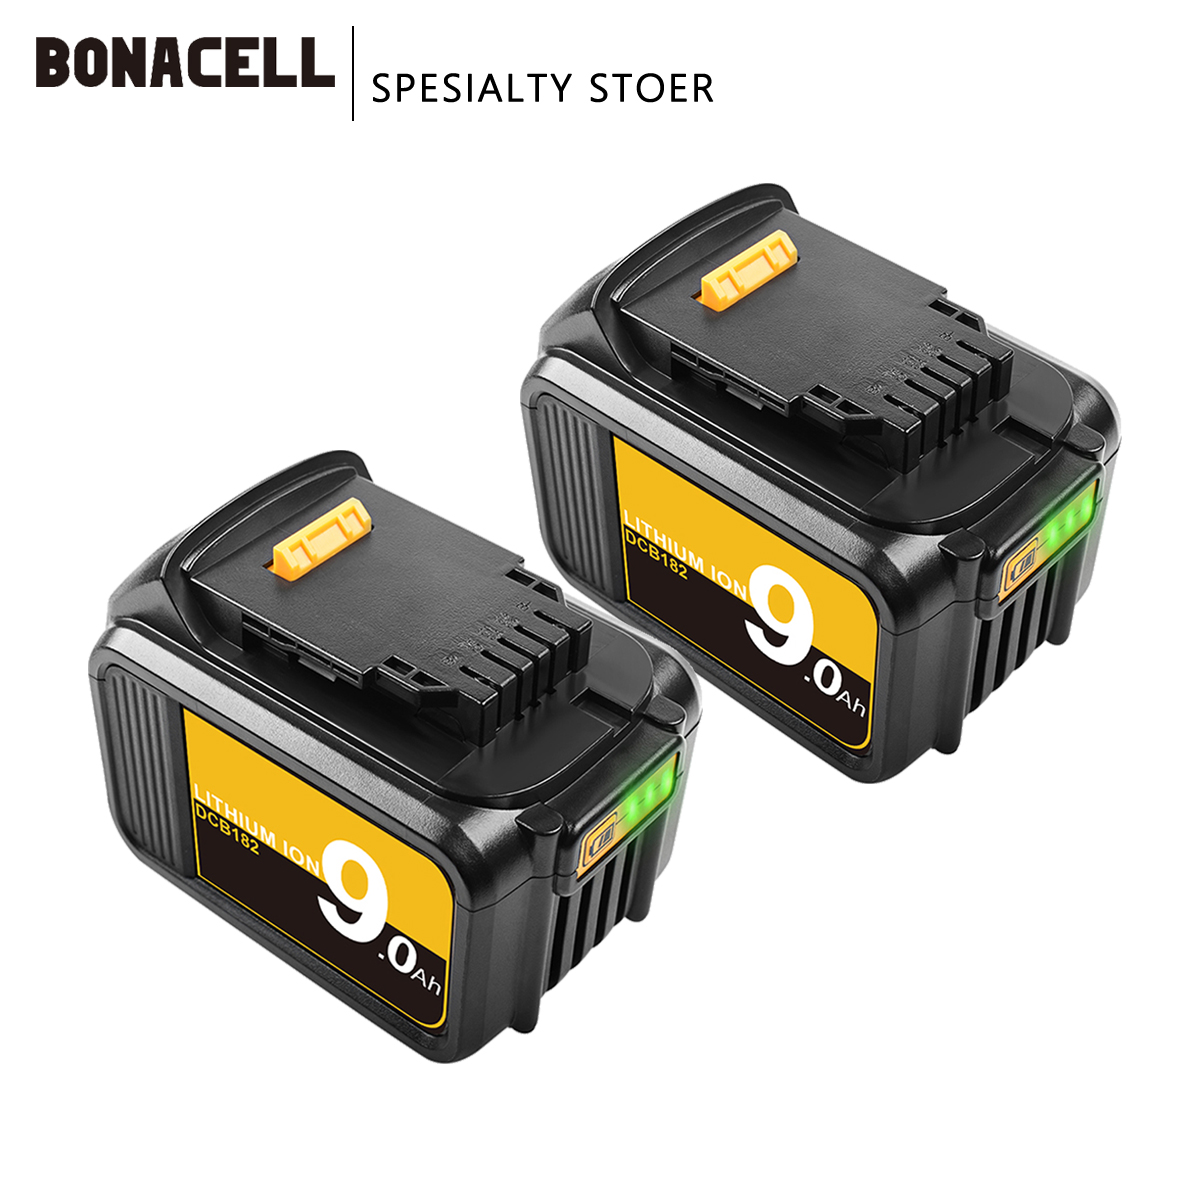 

Bonacell 18V 20V Max XR 9.0Ah Lithium Ion Replacement Battery for Dewalt DCB200 DCB203 DCB204 DCB184 DCB181 DCB182 Battery 9000m